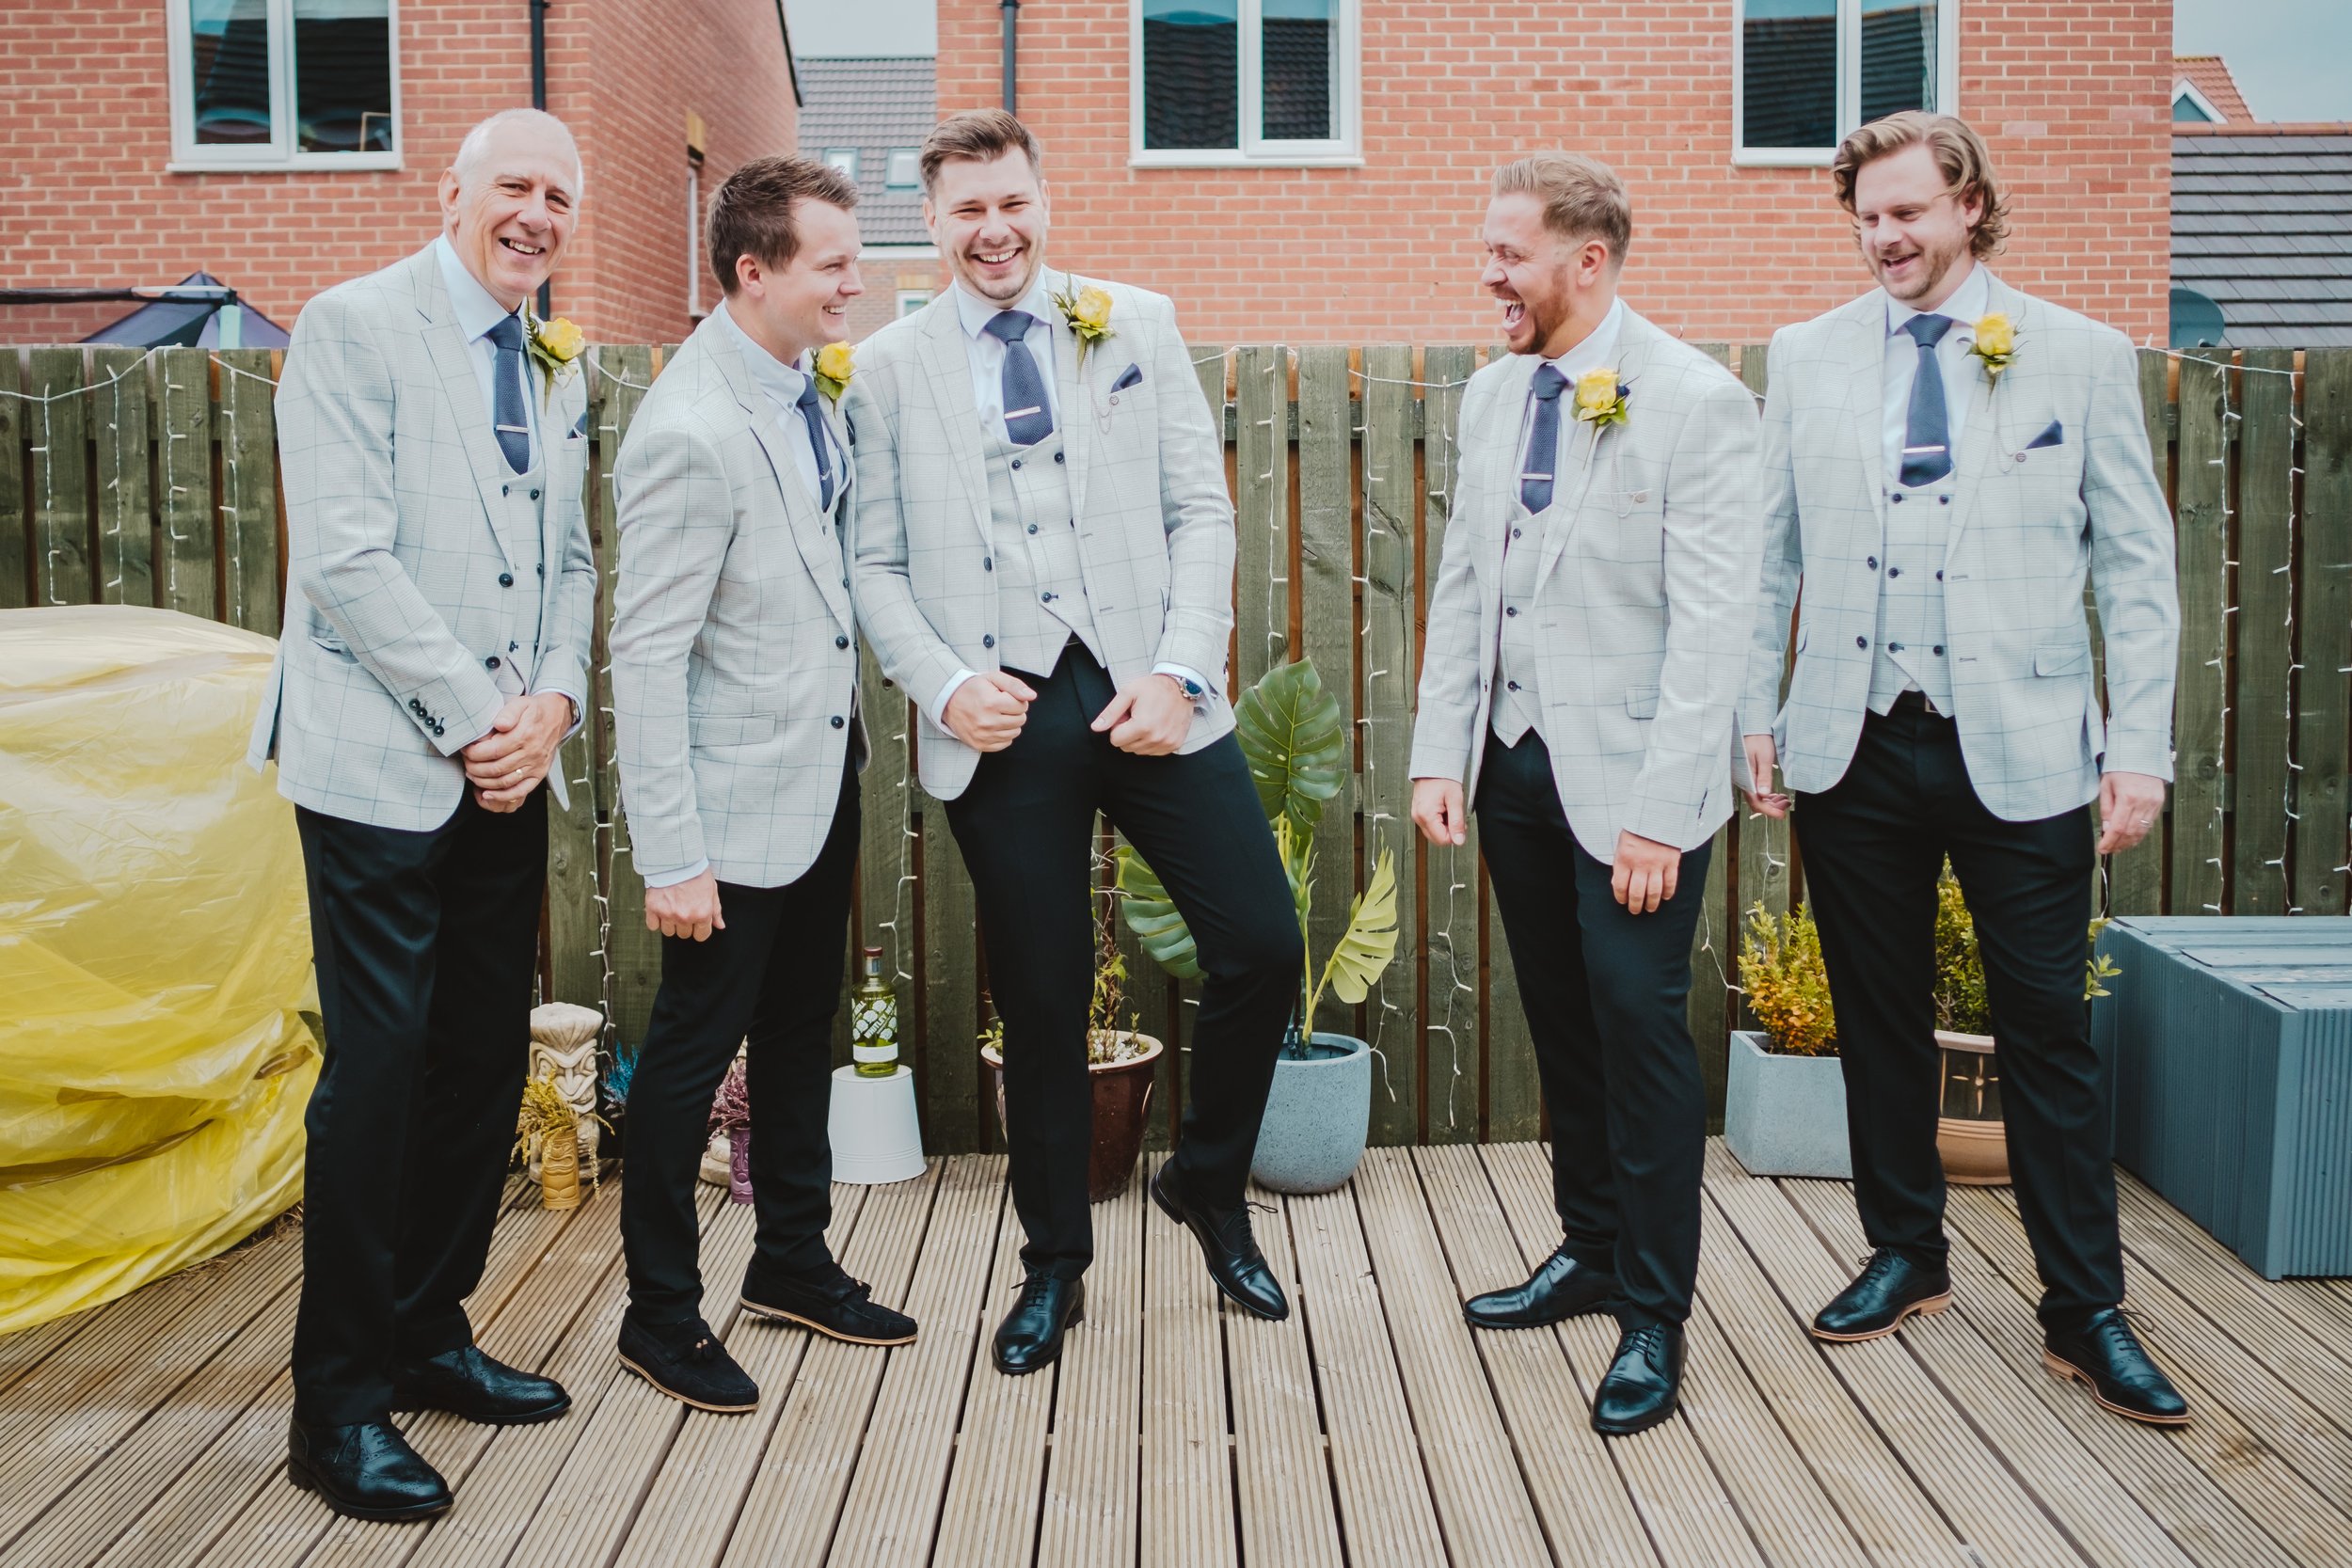 The groom and his merry men standing outside having a laugh.